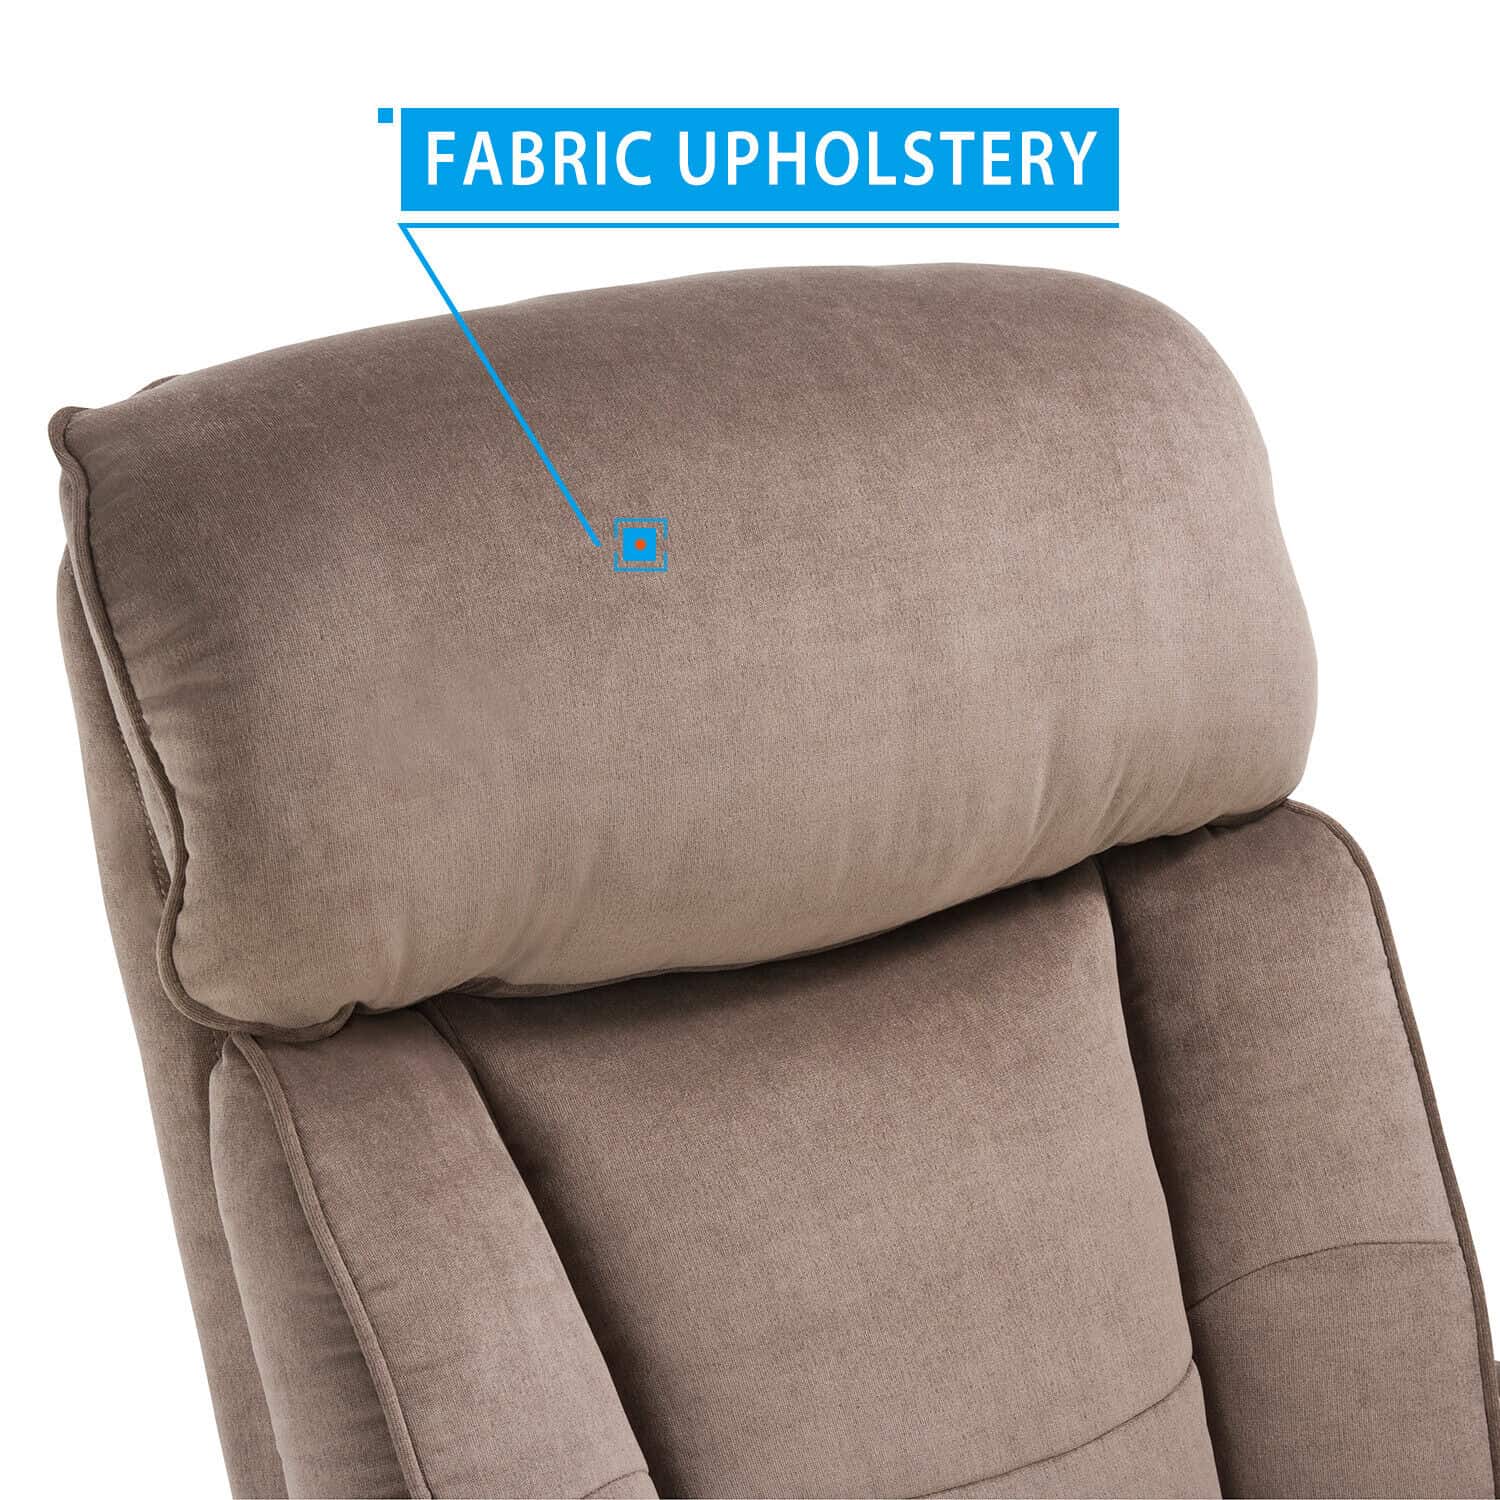 An image of a recliner with the fabric upholstery labeled.